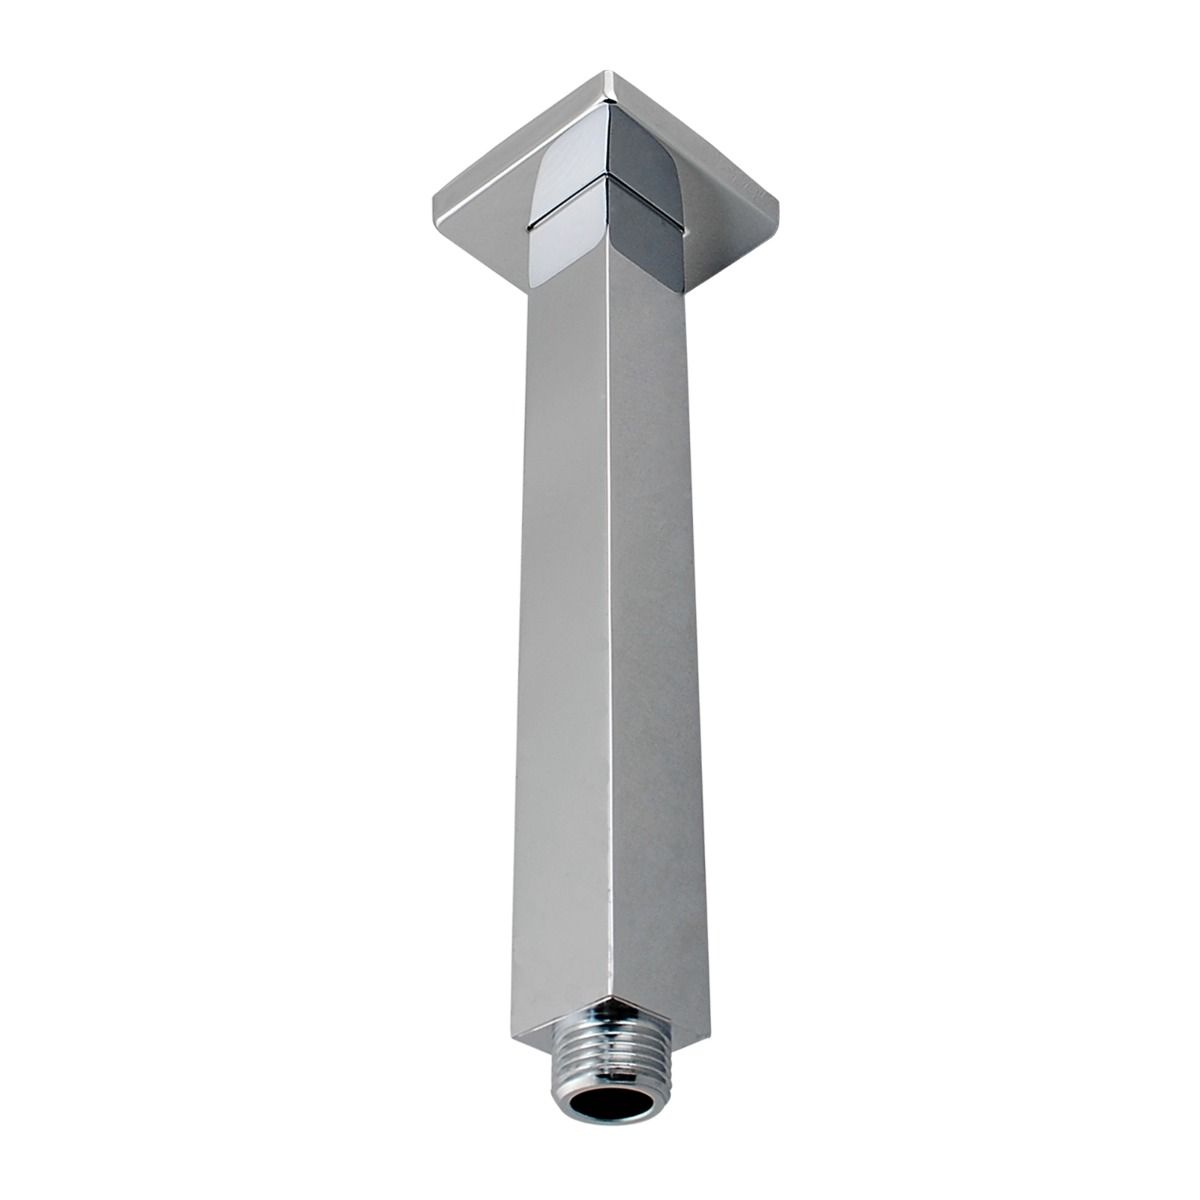 Cavallo 200mm Brushed Nickel Square Ceiling Shower Arm